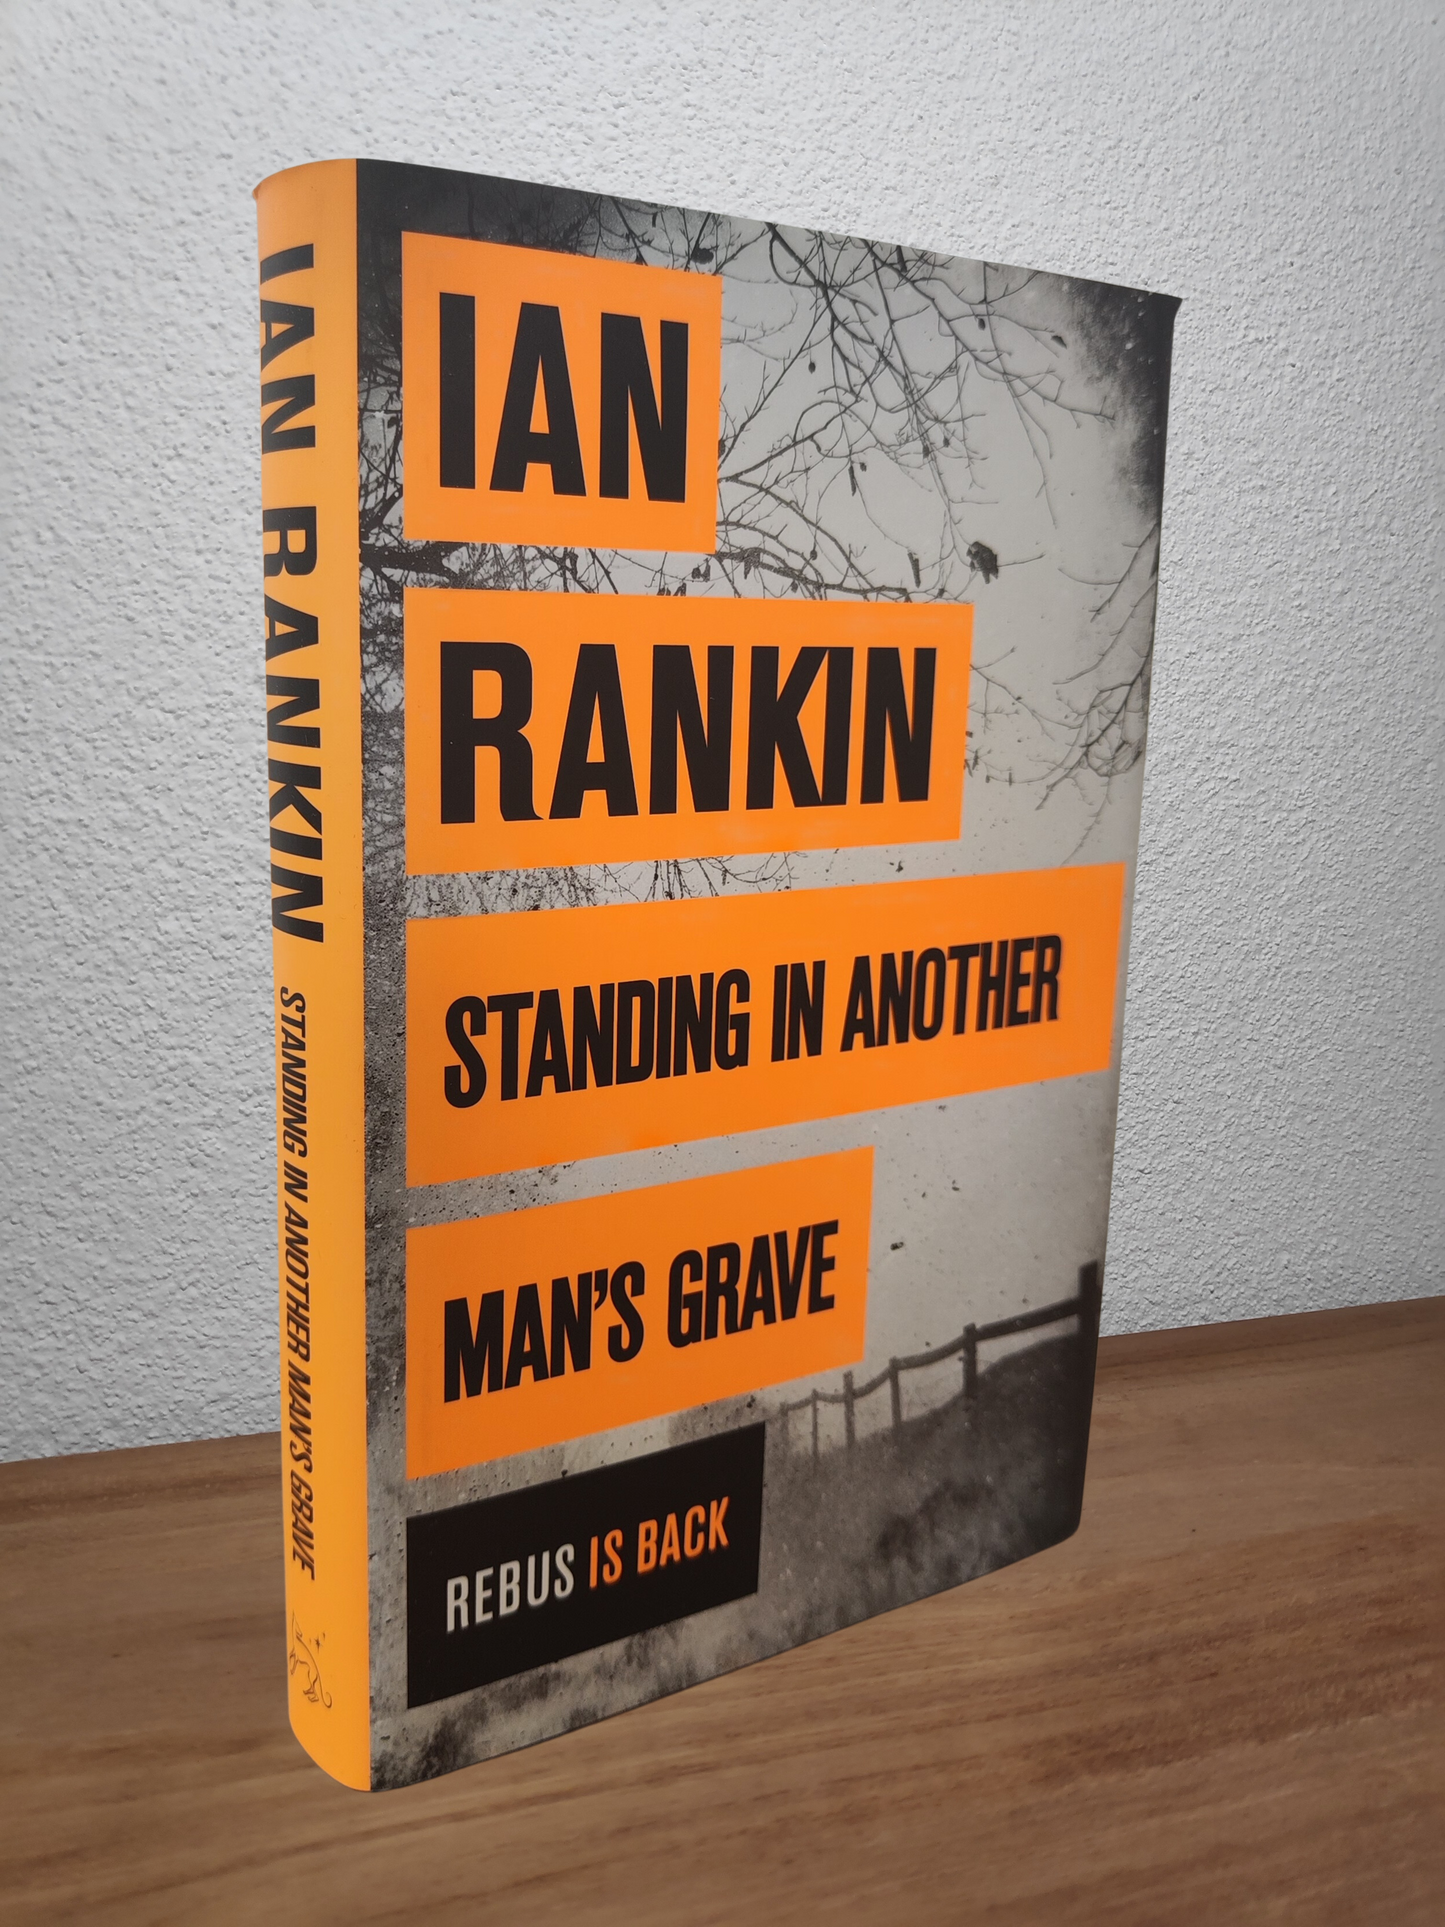 Ian Rankin - Standing in Another Man's Grave (Inspector Rebus #18)